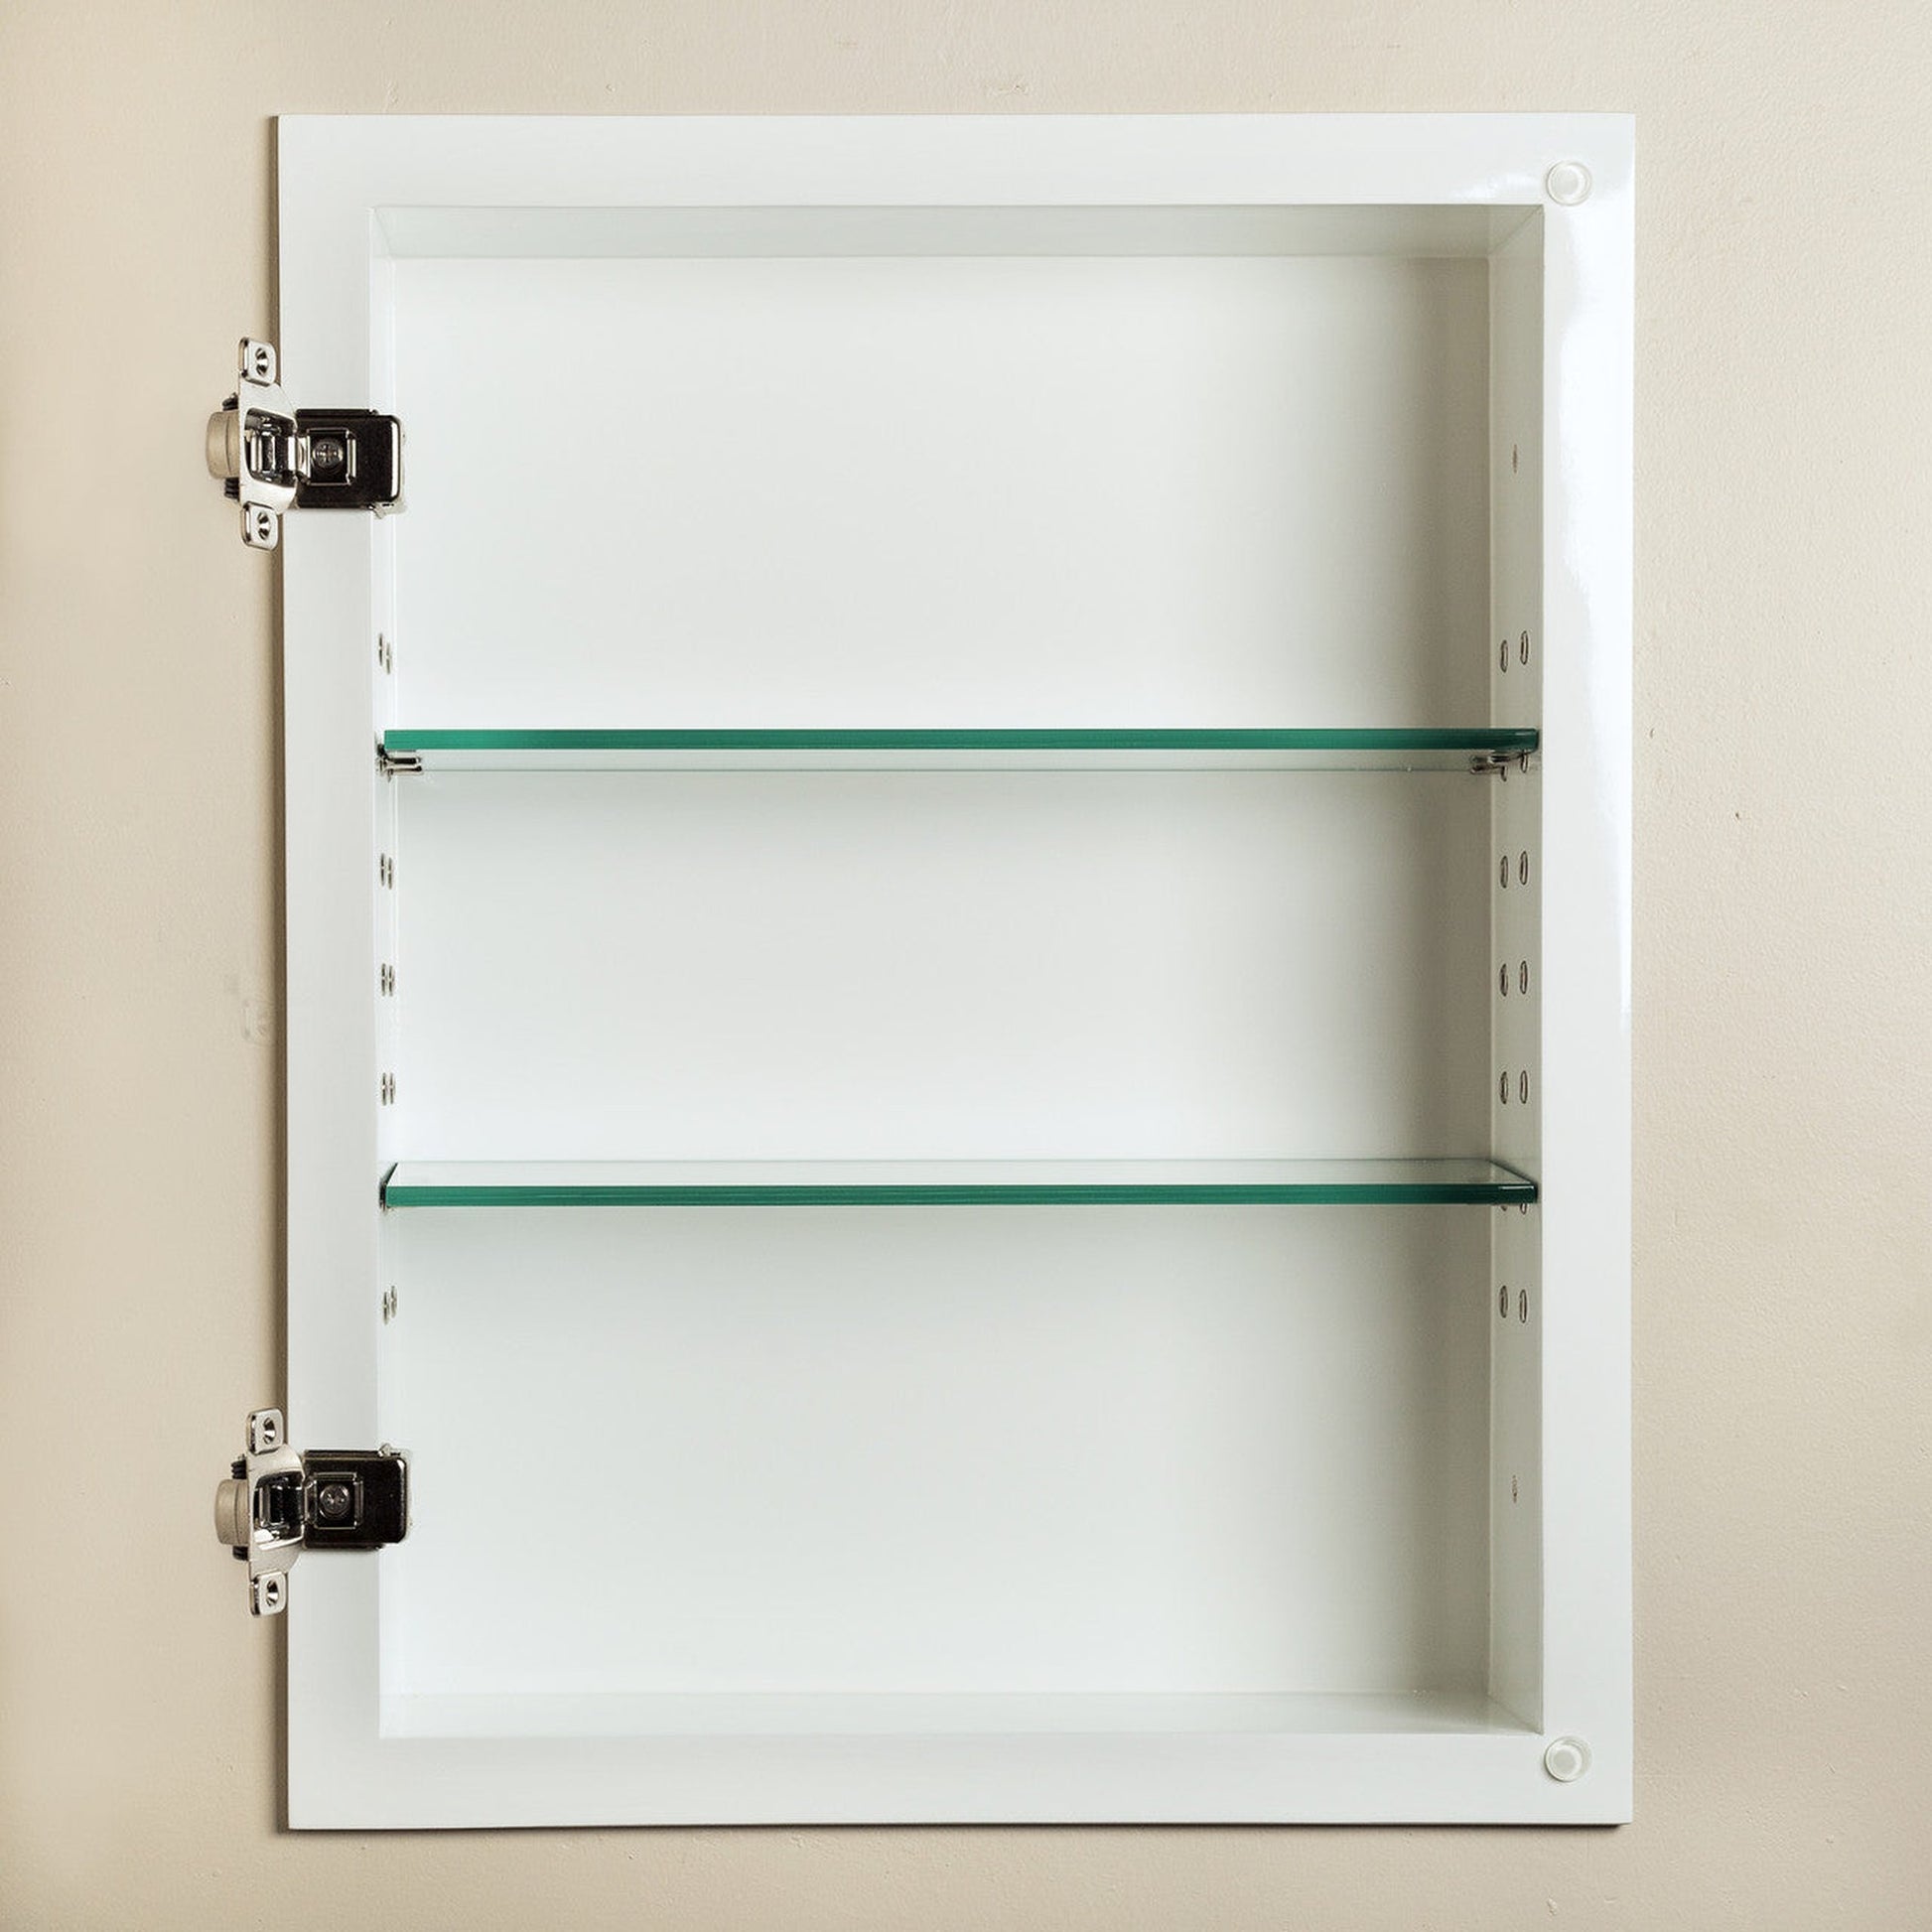 Fox Hollow Furnishings 14" x 18" Unfinished Raised Edge Special 6" Depth White Interior Mirrored Medicine Cabinet